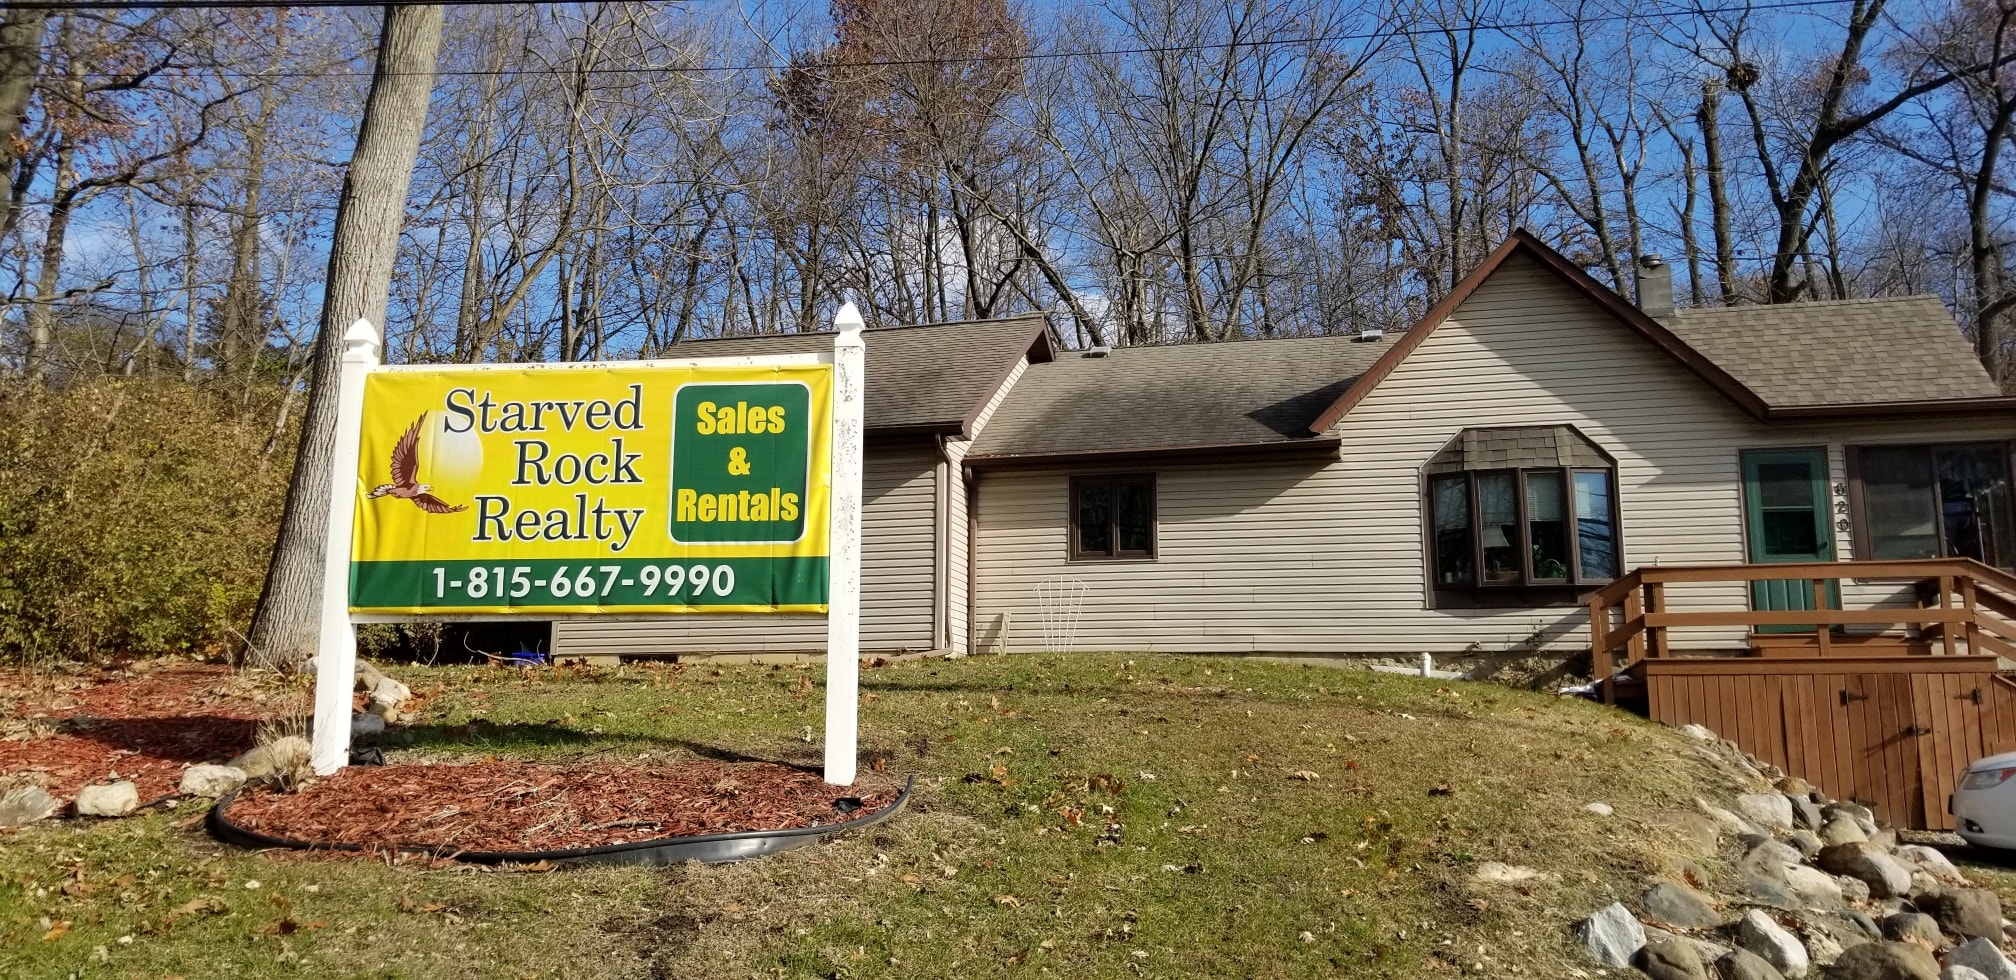 Starved rock realty poster for sales & rentals